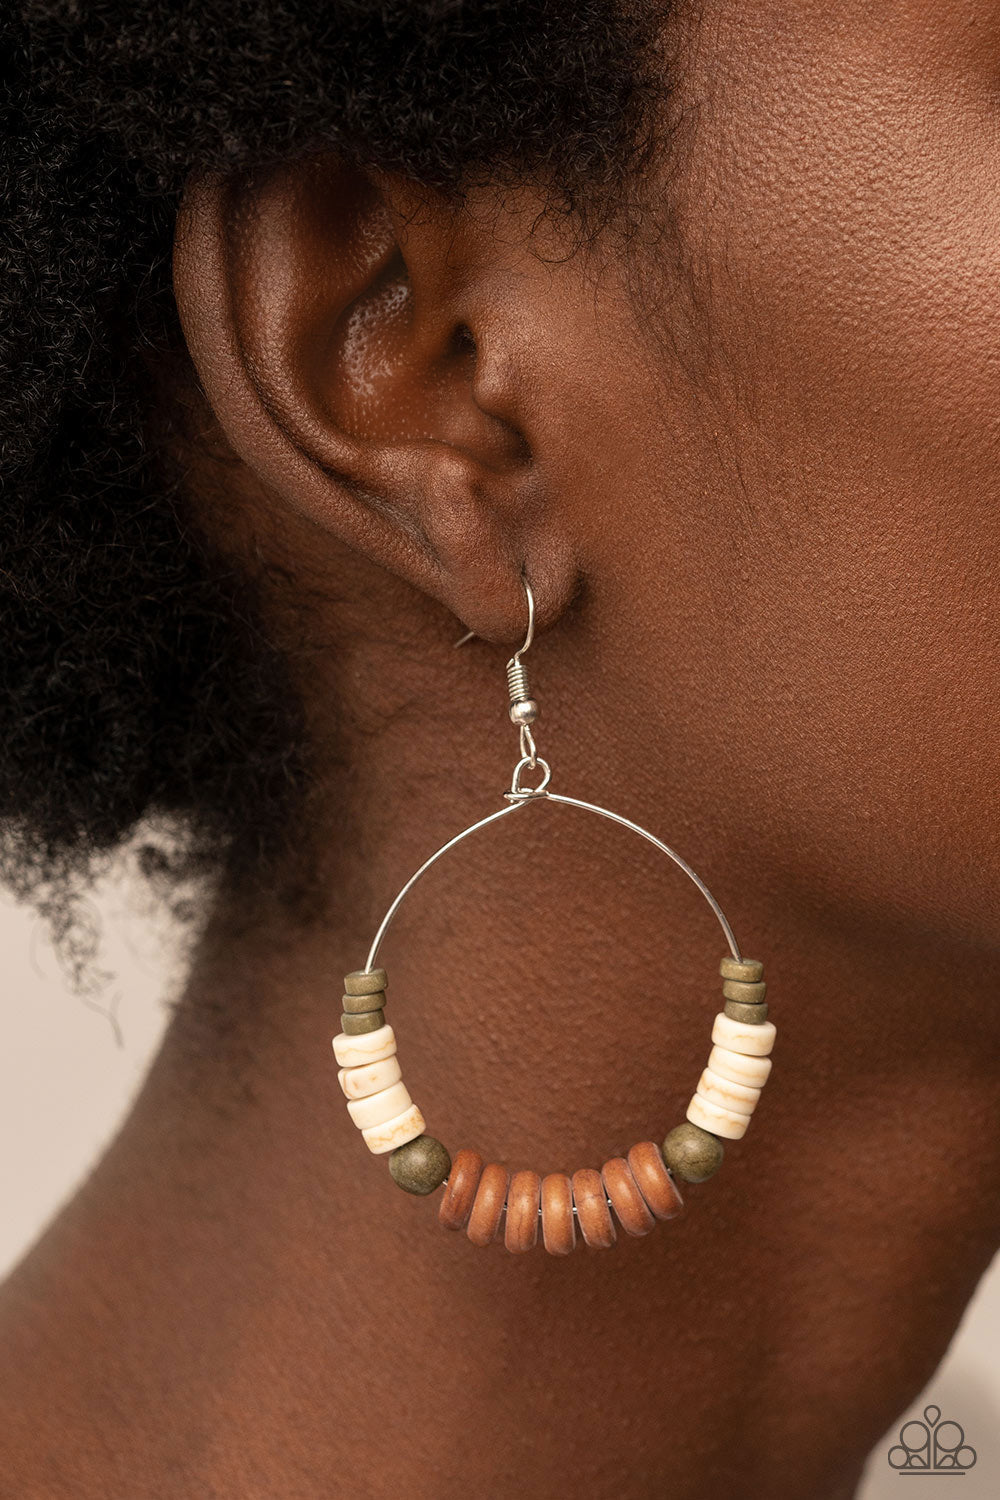 Earthy Esteem - Brown and Green Earrings - Paparazzi Accessories - Featuring round and disc shapes, an earthy assortment of white, brown, and green stones glides along a dainty wire hoop for an artisan inspired aesthetic.